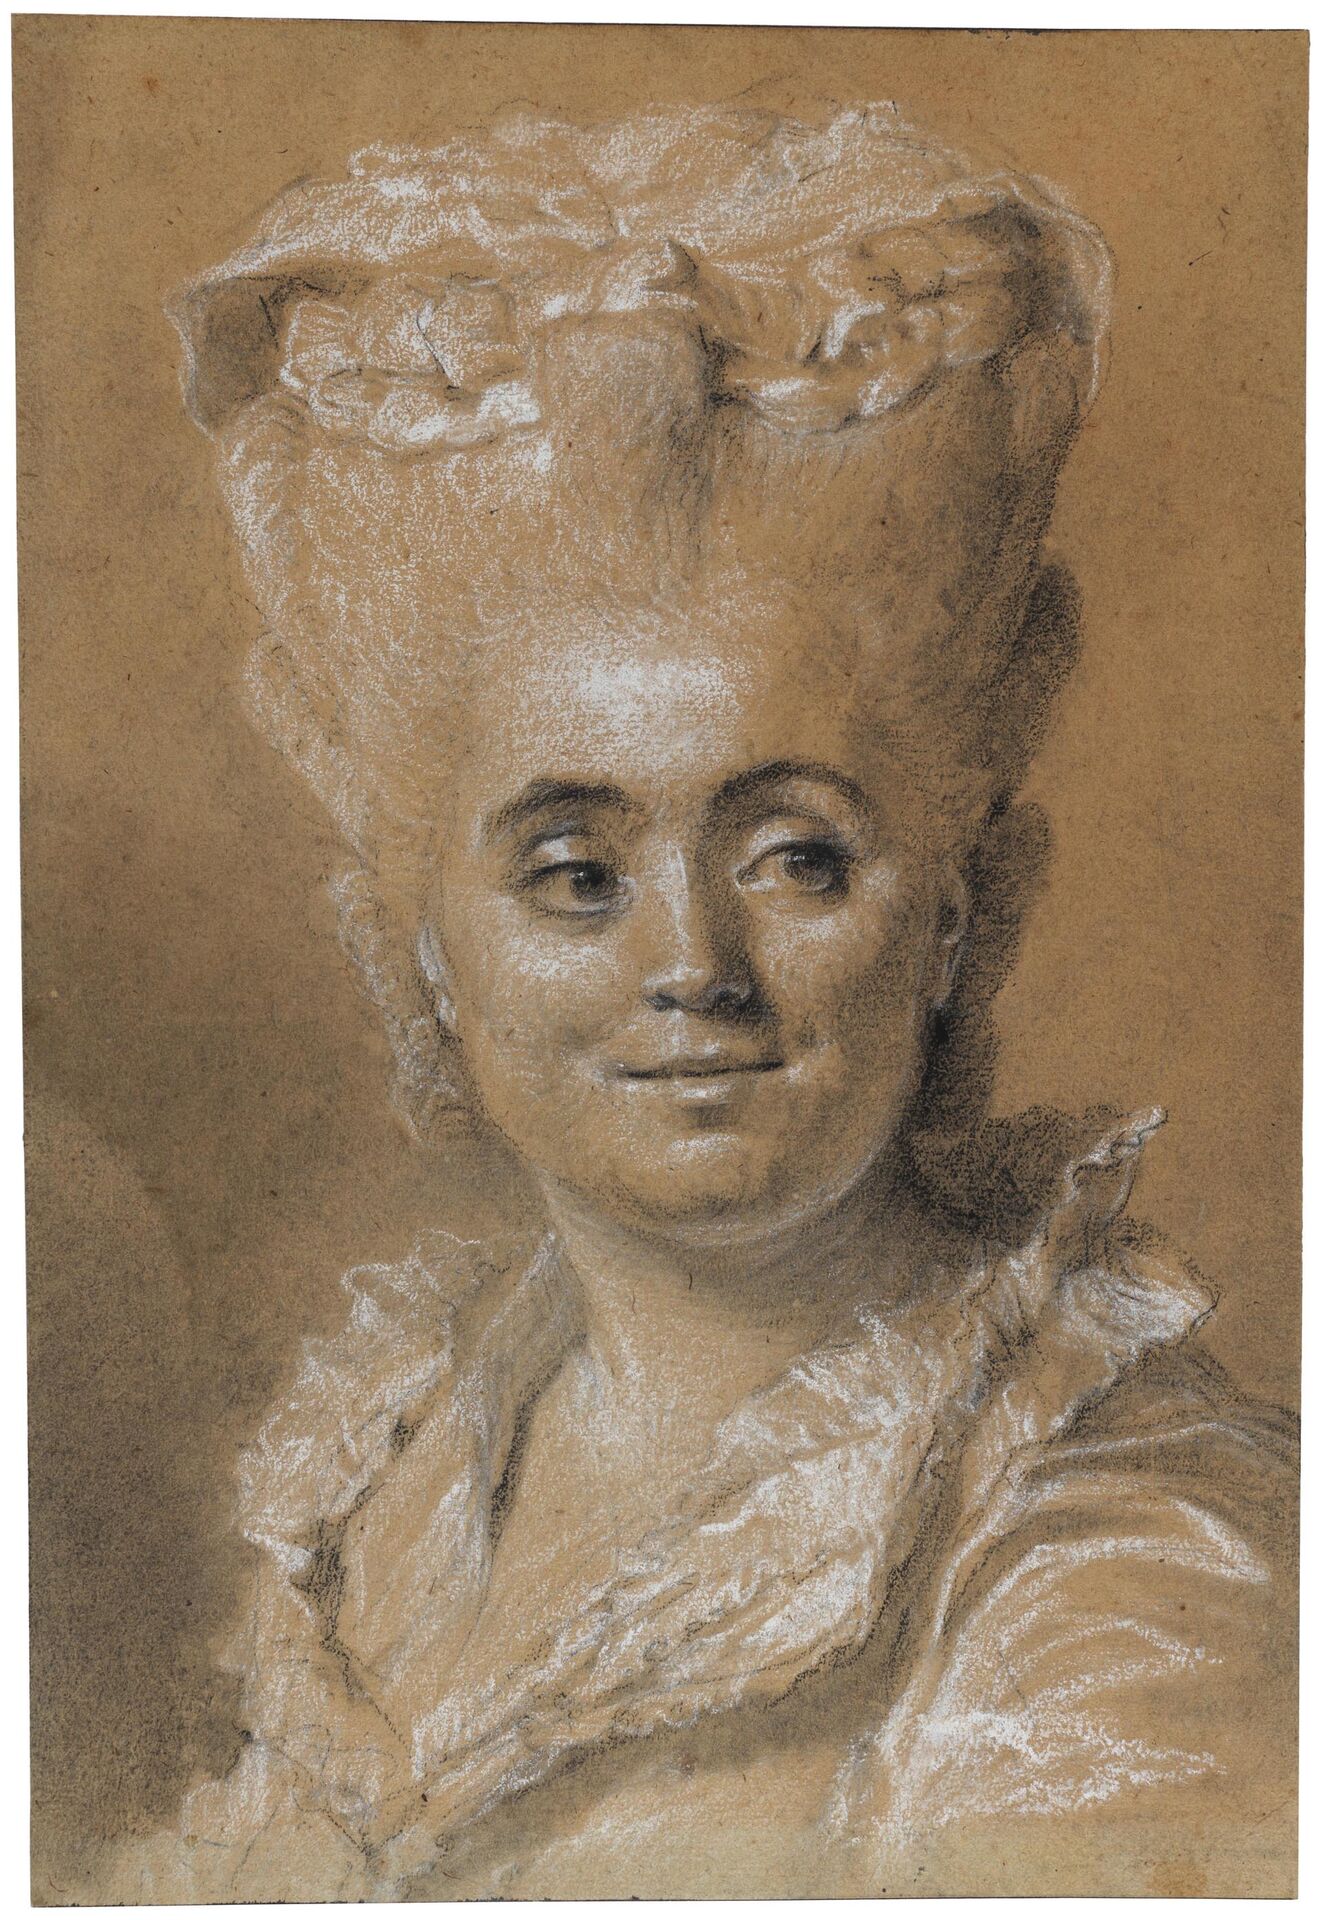 Johann-Ernst Heinsius, Portrait of a Woman Looking to the Right. Photo: Cecilia Heisser/Nationalmuseum.